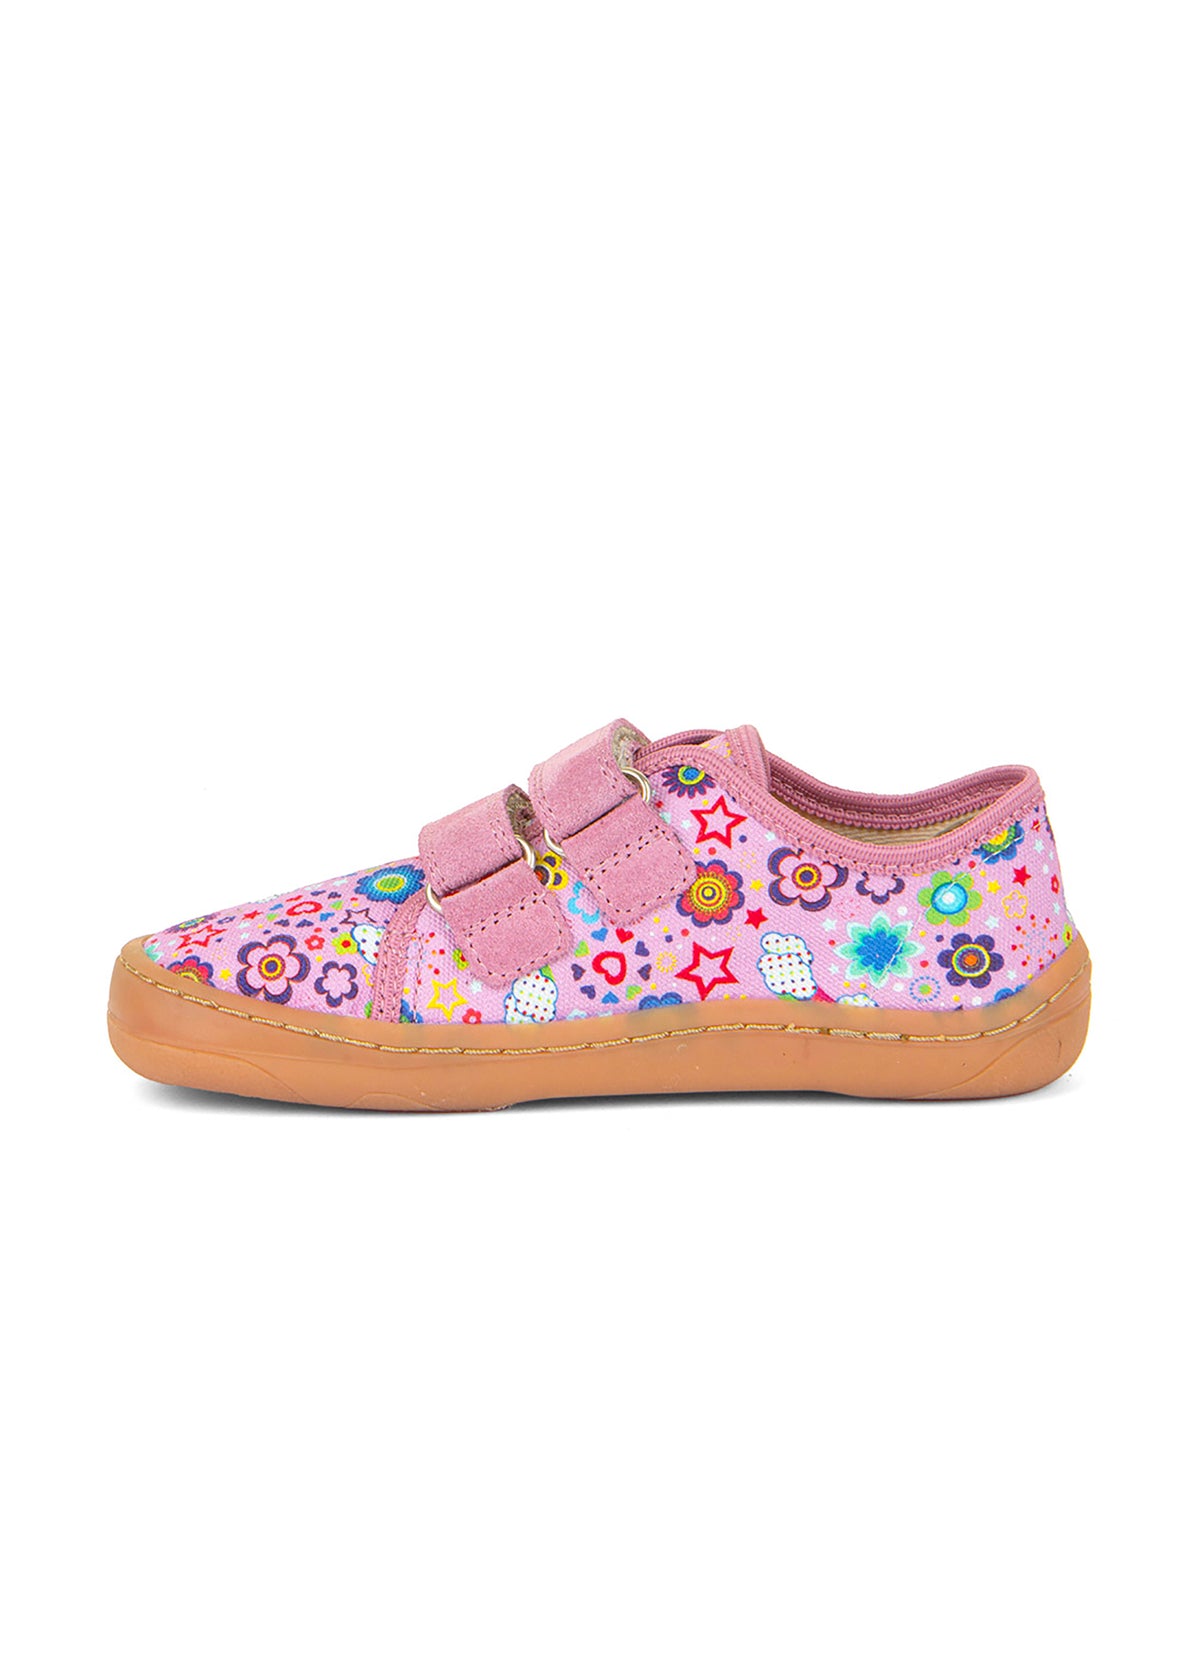 Children's barefoot sneakers - pink, multi-colored patterns